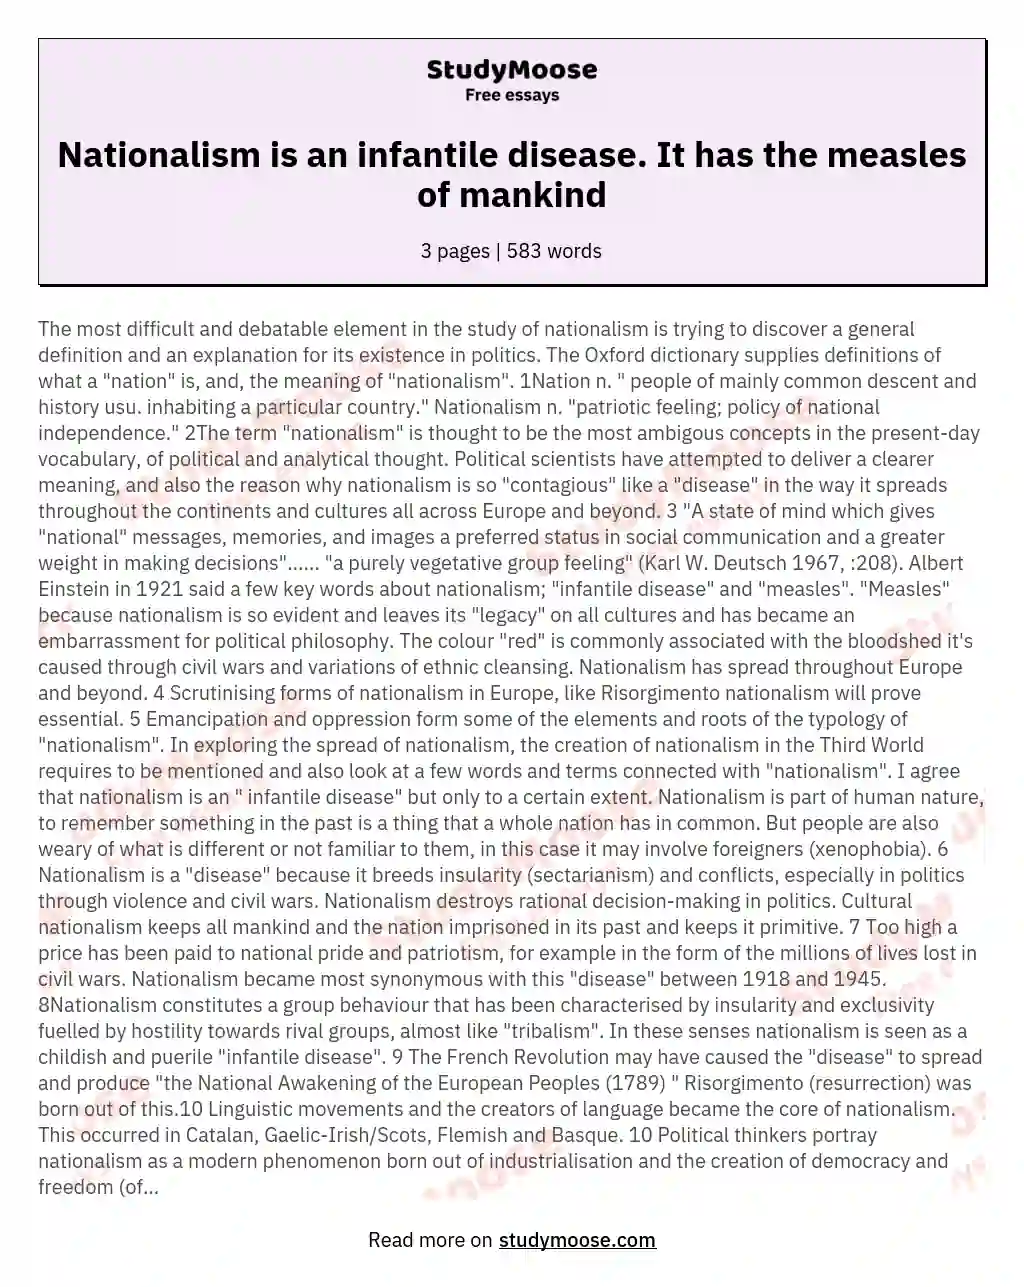 Nationalism is an infantile disease. It has the measles of mankind essay